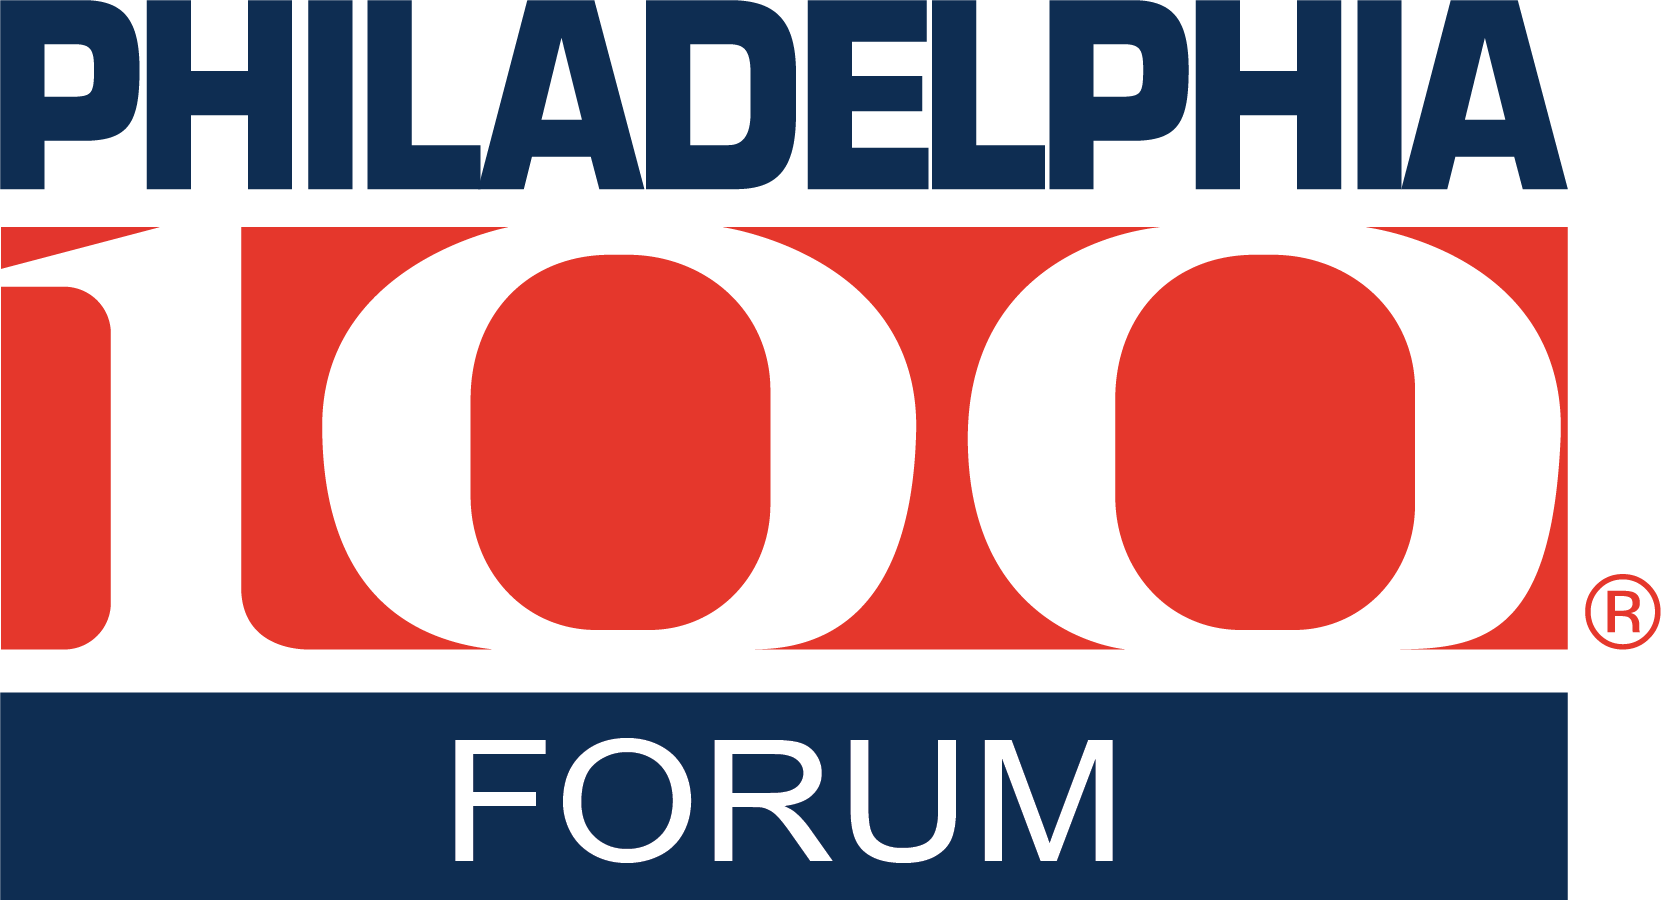 The Philadelphia100 is one of the most sought awards in the region